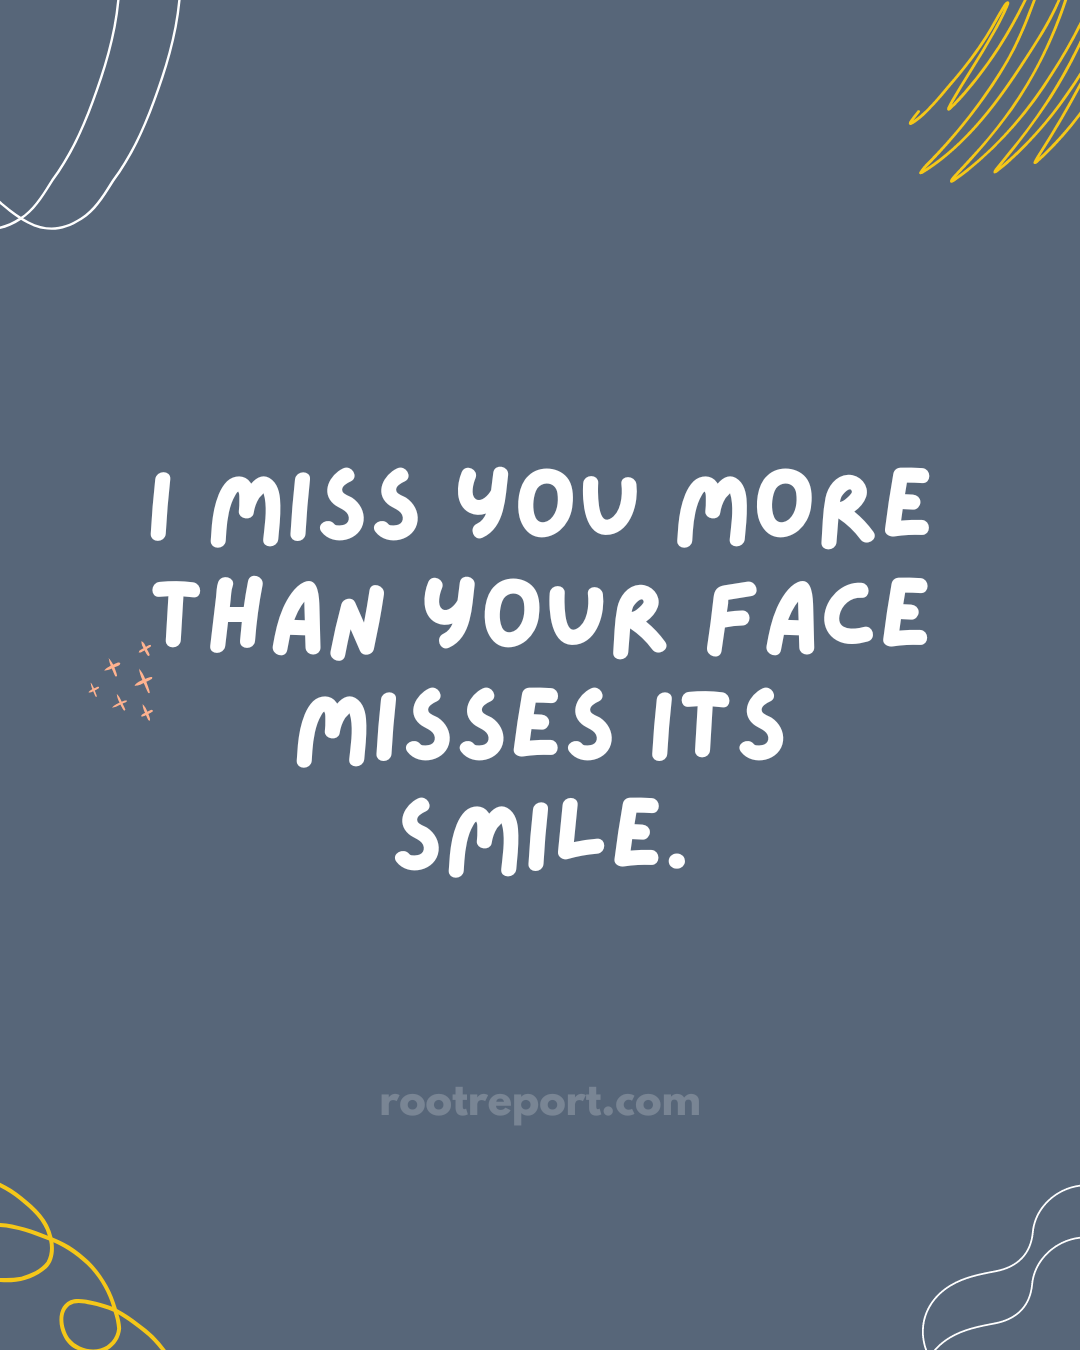 I miss you more than your face misses its smile. 